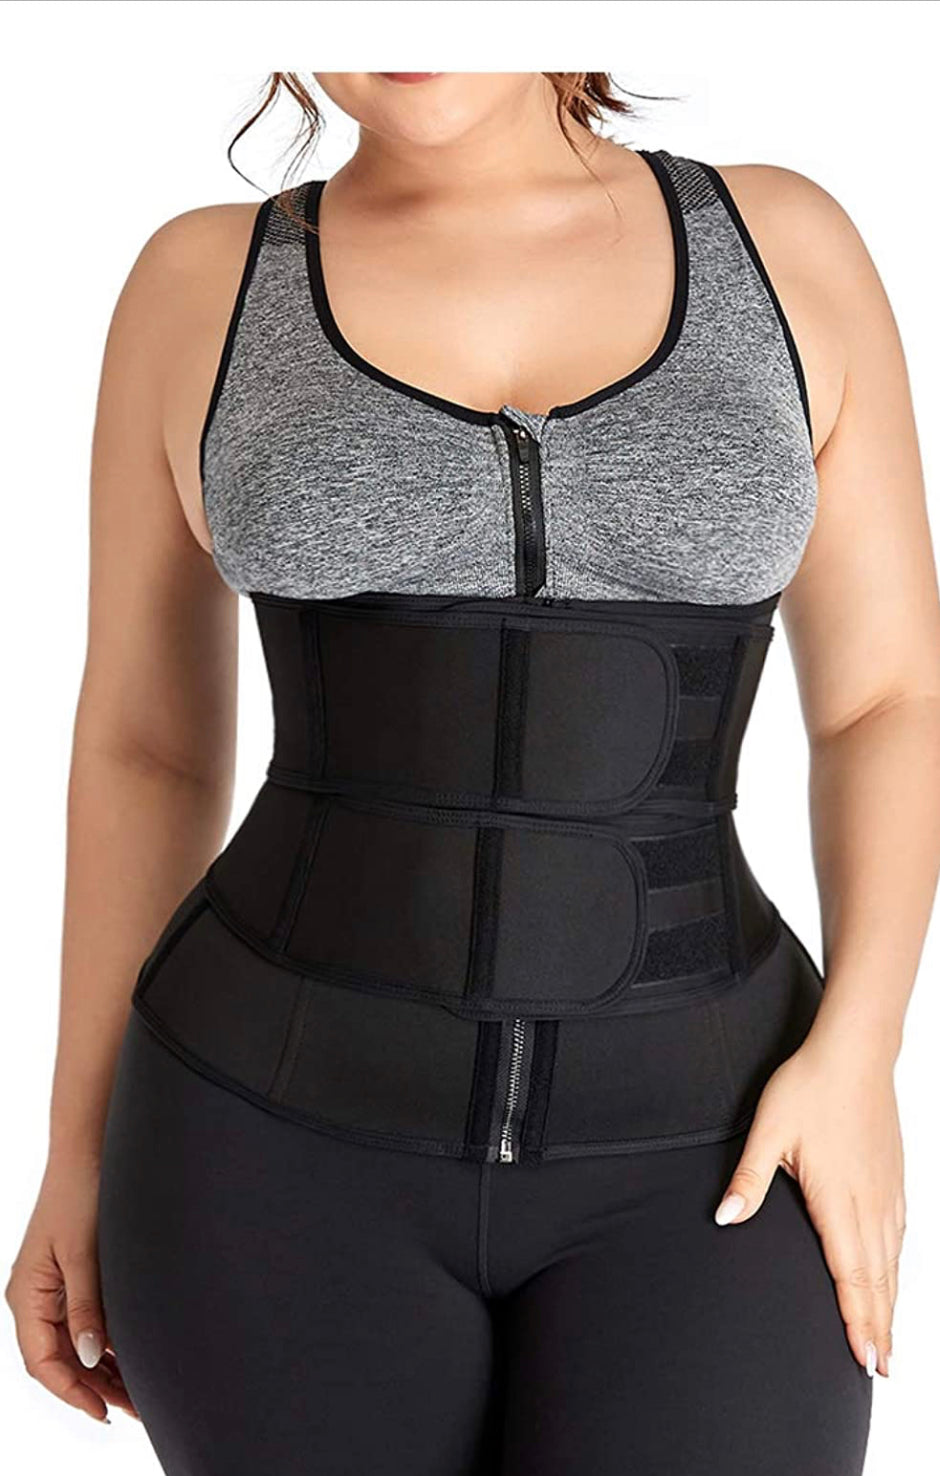 Who is your Waist Trainer plug ? Do they have this? 31 steel bone